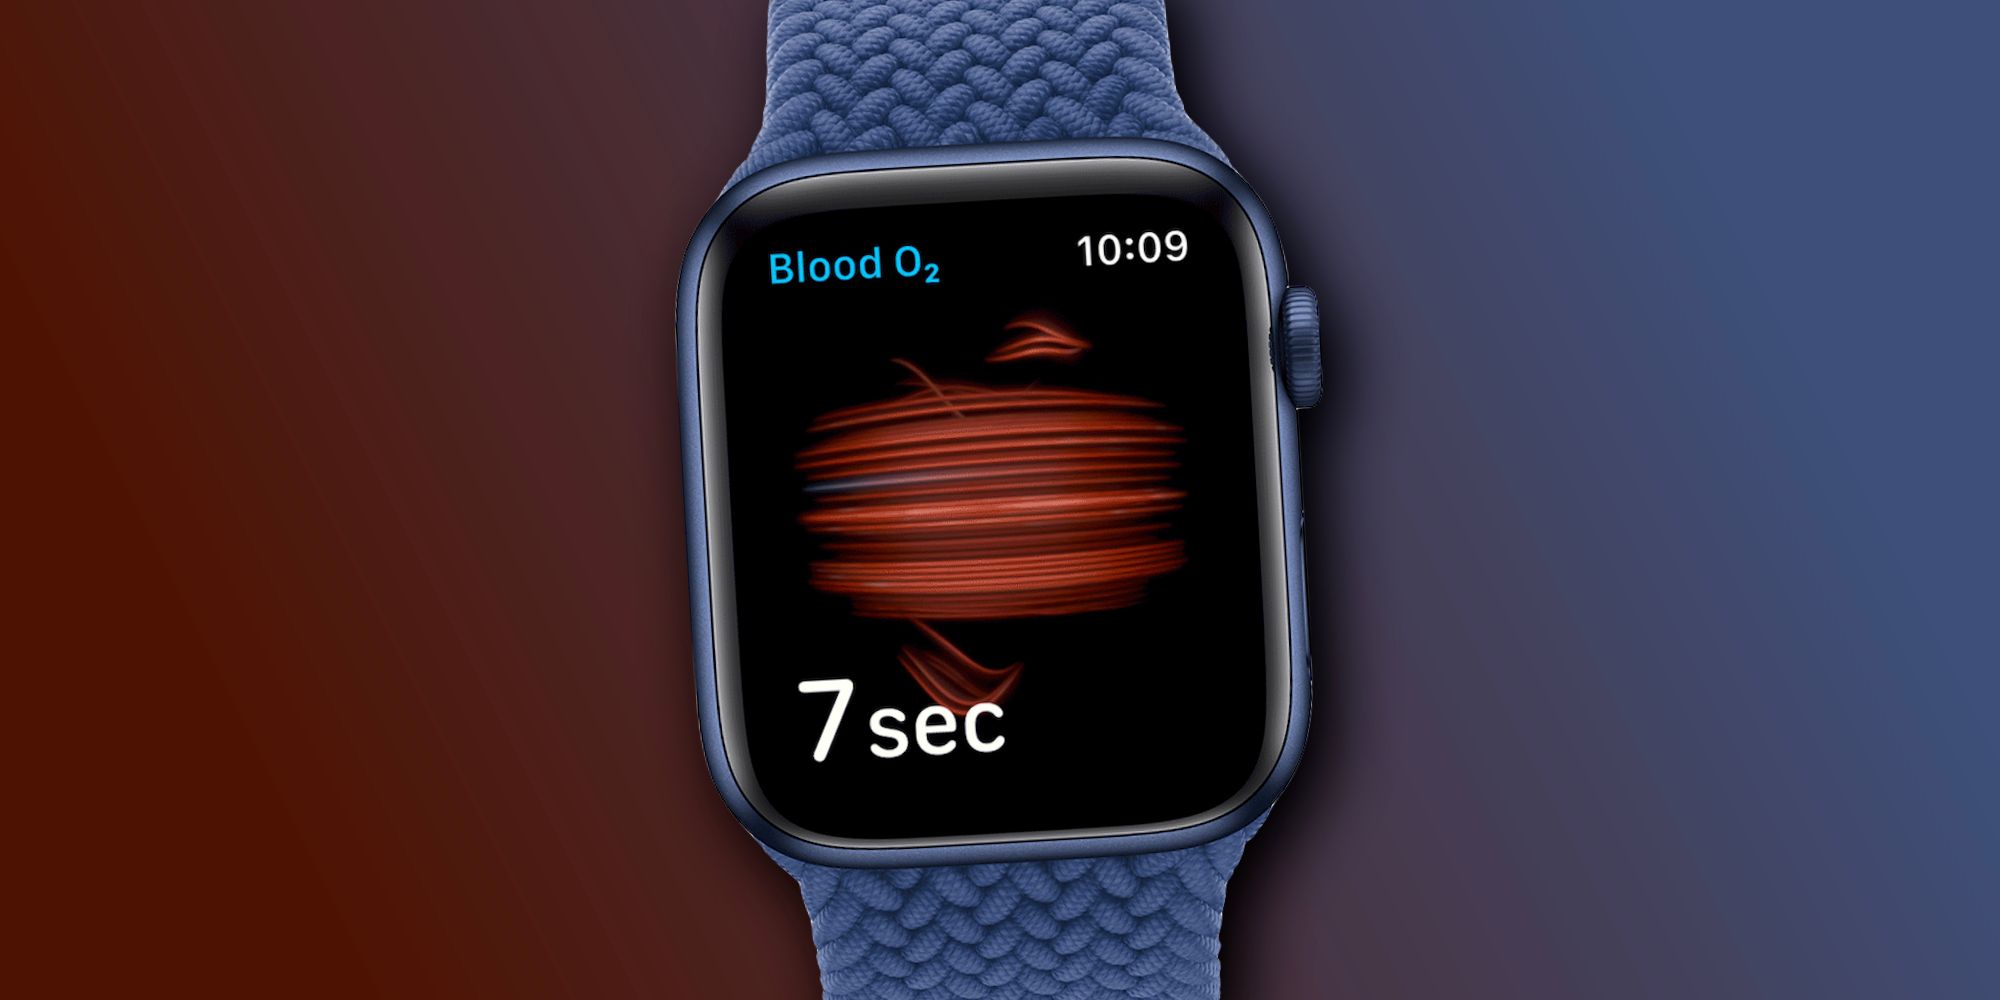 Apple Watch Series 6 with SpO2 tracking